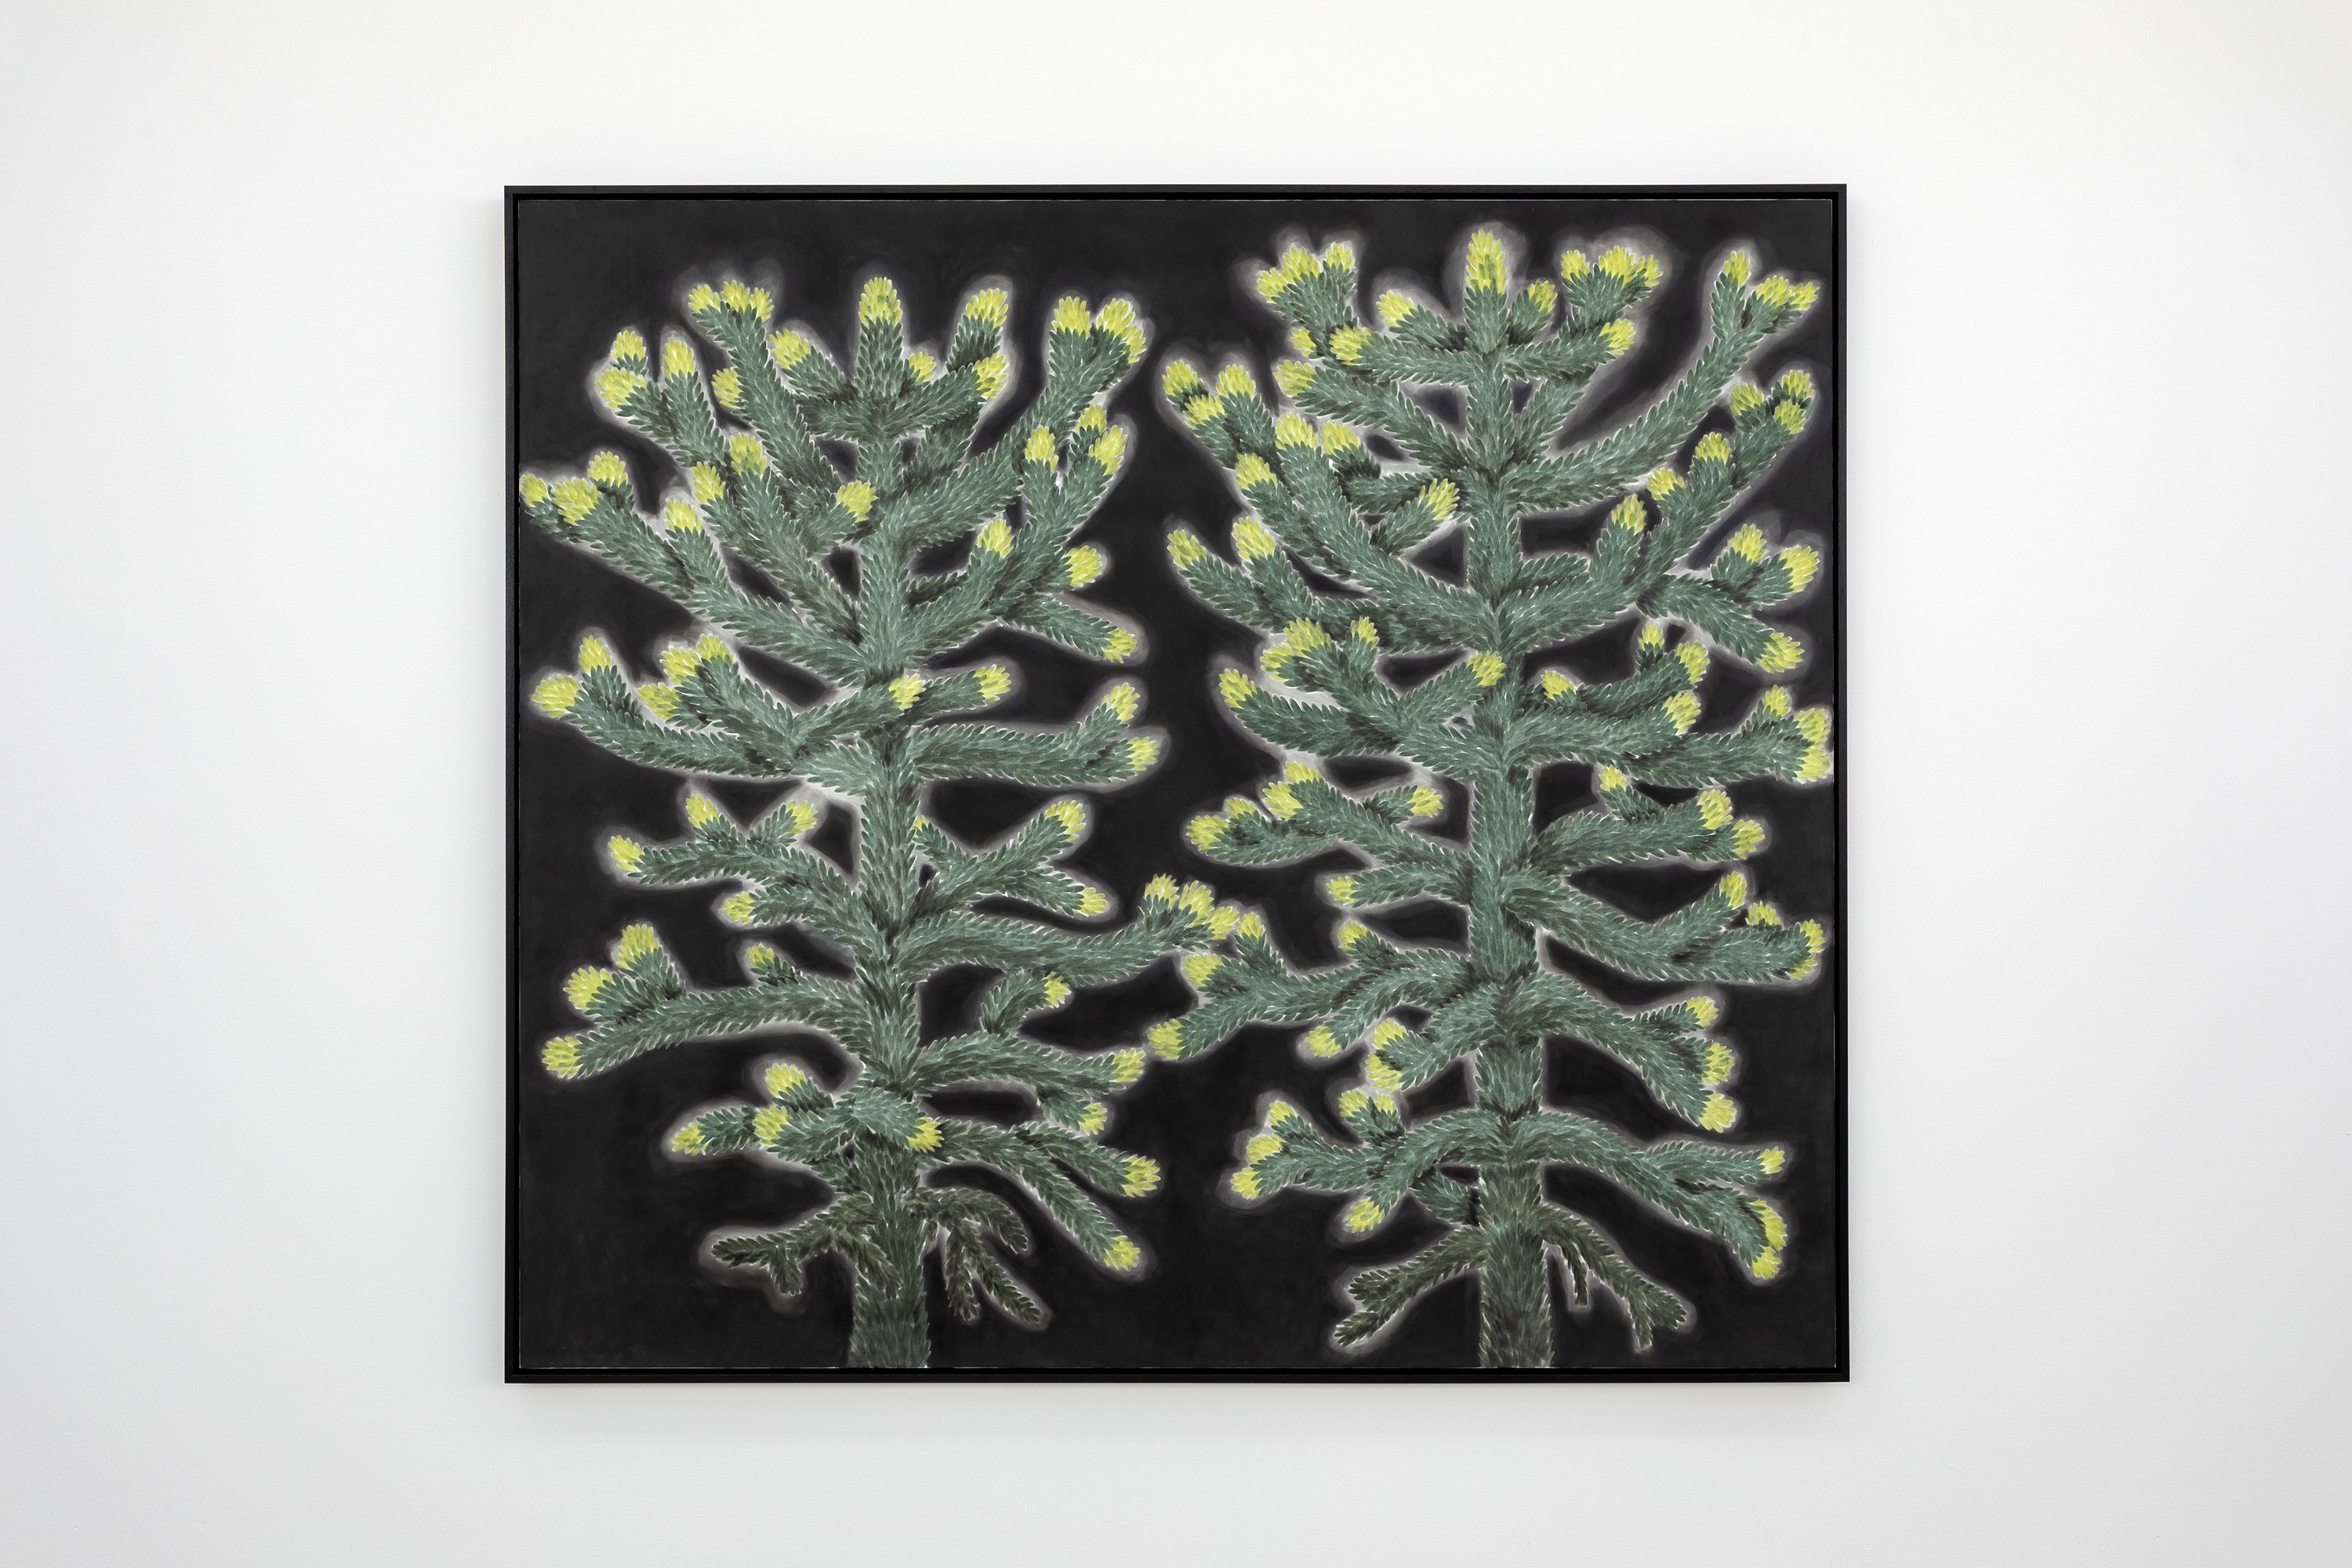 Andrew Sim  portrait of two monkey puzzle trees (with spring growth), 2023  Pastel on canvas  163.6 x 183.6 x 5.4 cm, 64 3/8 x 72 1/4 x 2 1/8 in framed  Courtesy of the Artist, The Modern Institute/Toby Webster Ltd., Glasgow  Photo: Patrick Jameson